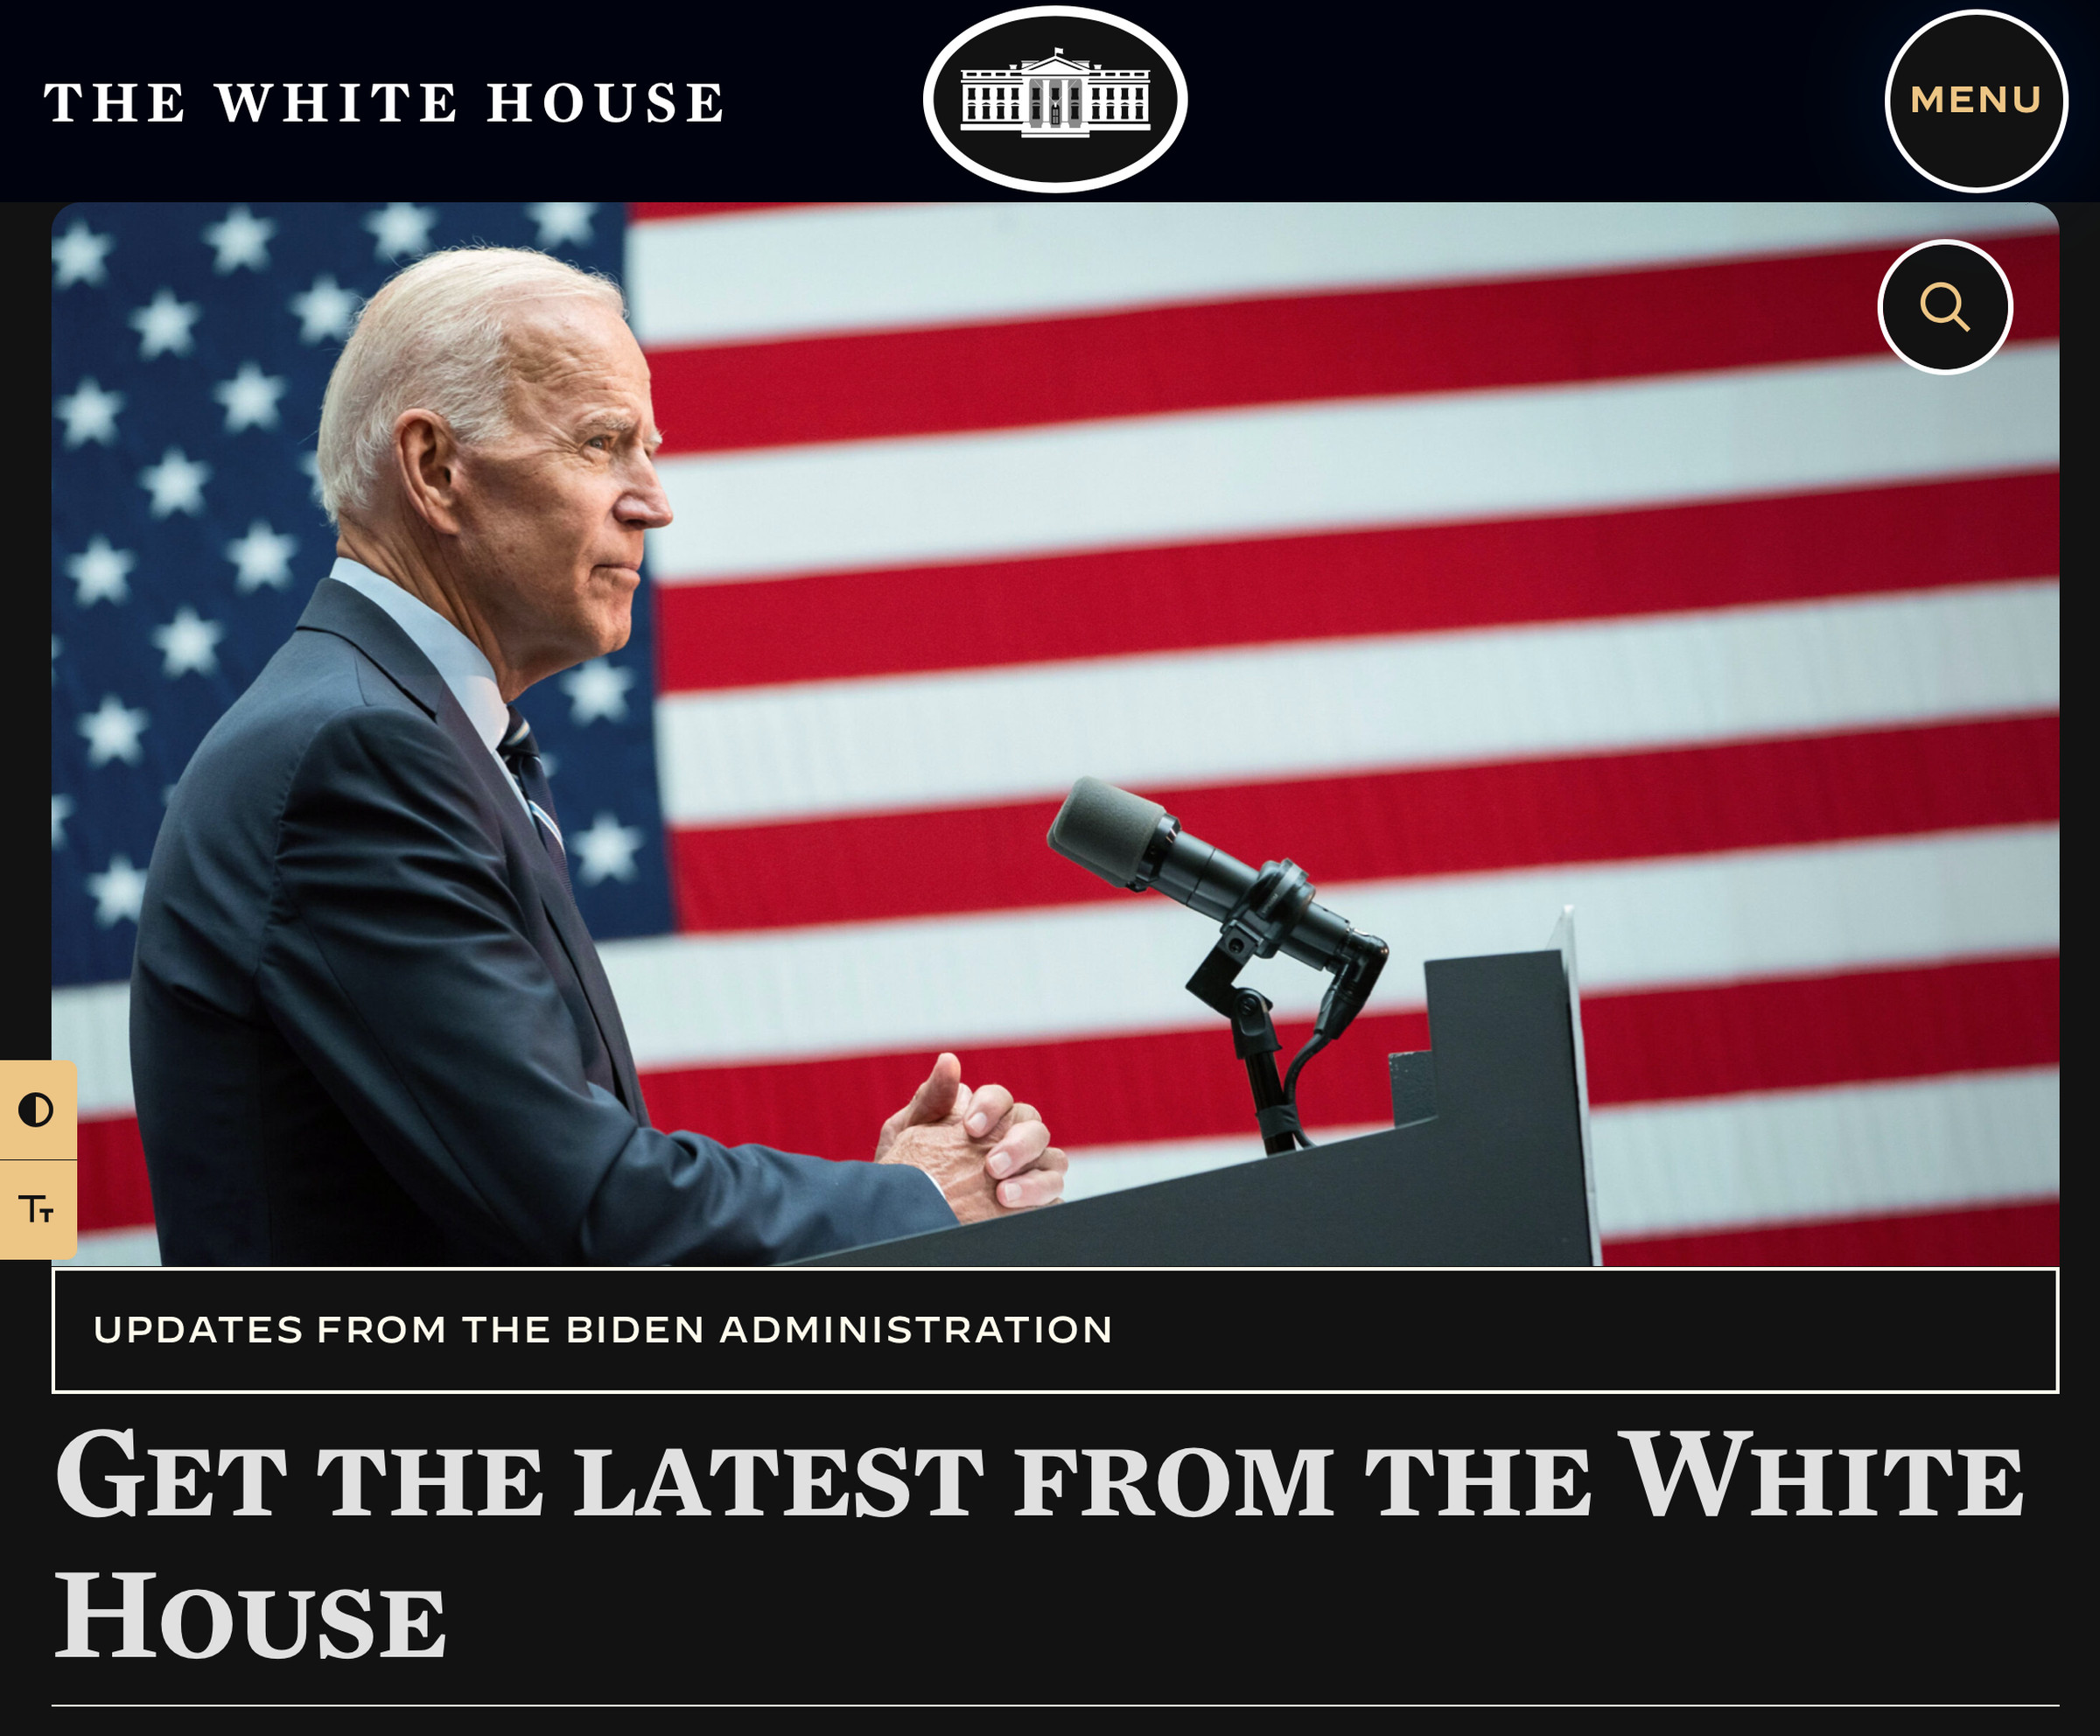 The White House site showing with a dark background, large buttons and text